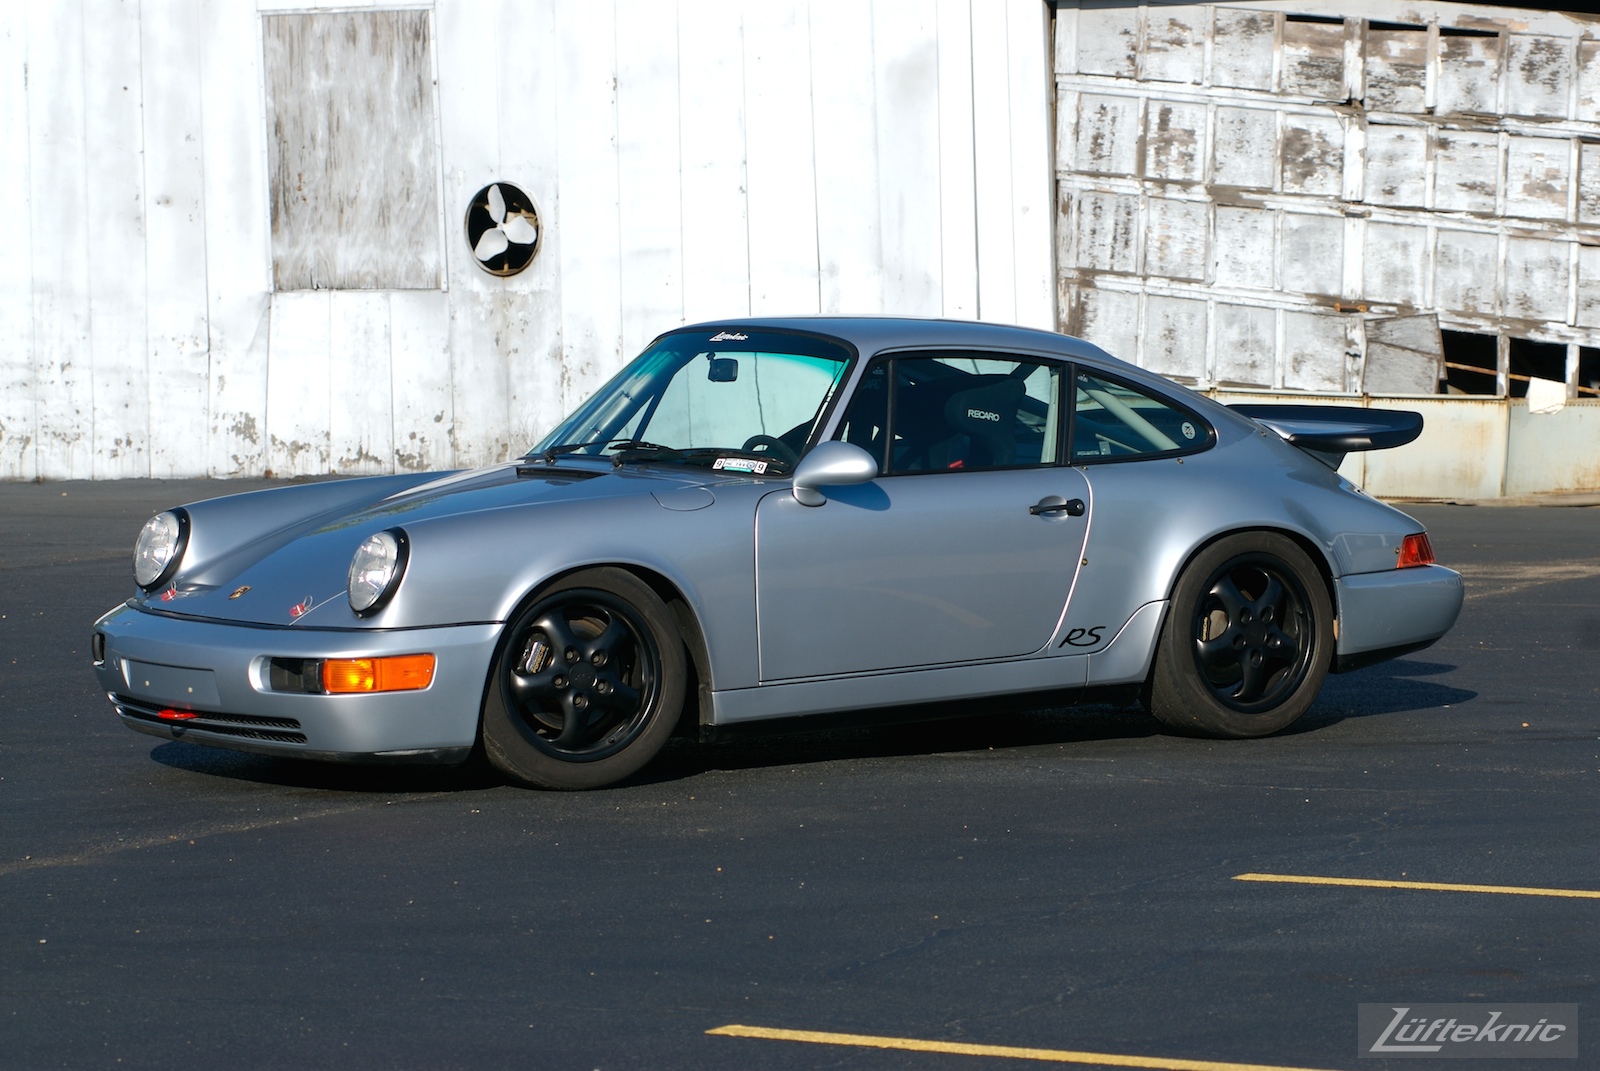 The 964 RS America in a parking lot with a dilapidated garage in the background.